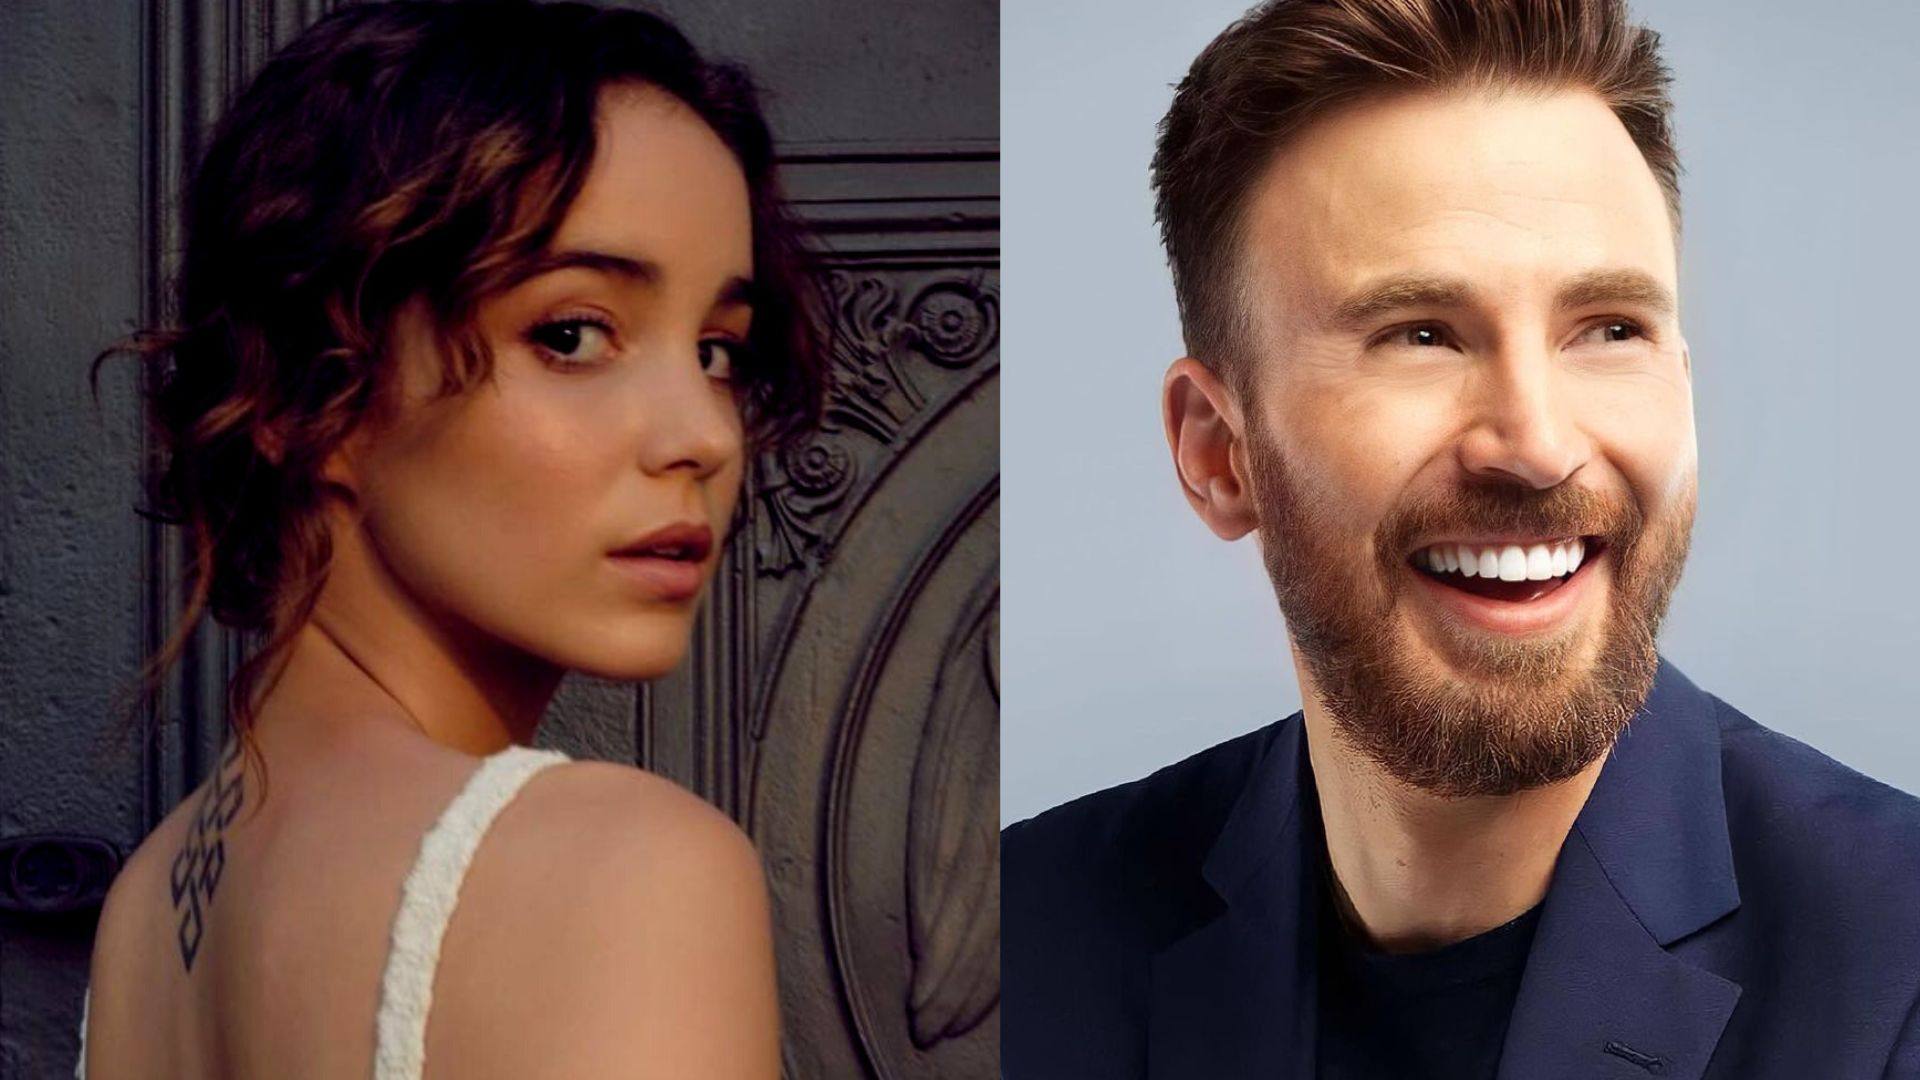 Alba Baptista (left) and Chris Evans (right) are reportedly dating, according to a source. Photos: @teamcevans, @alba.baptista/Instagram